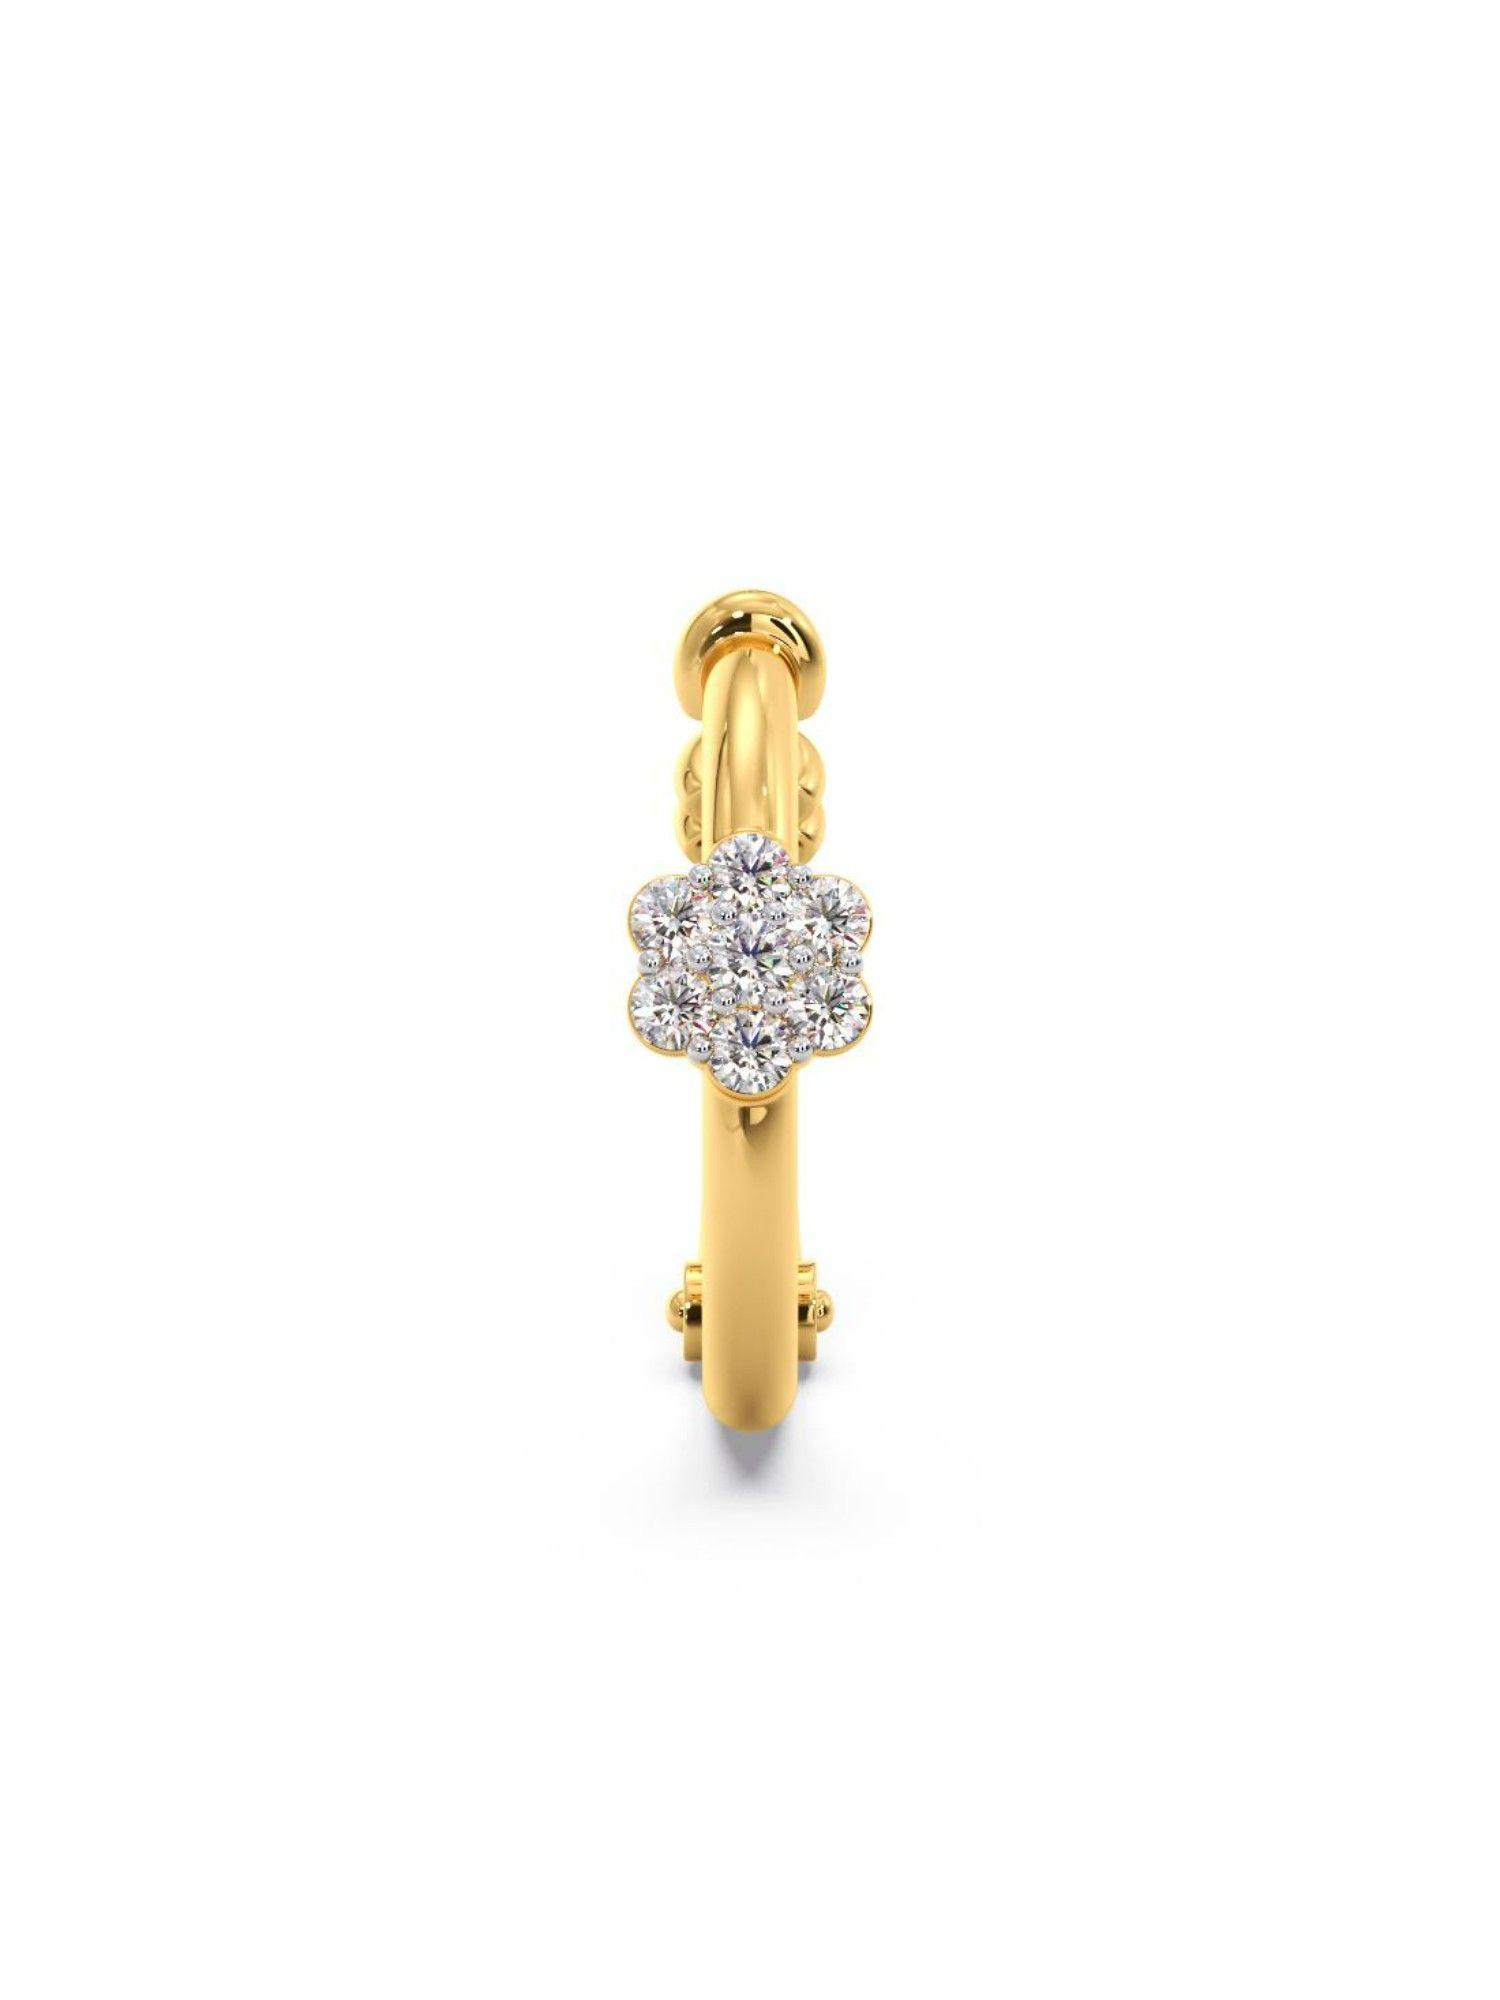 18k yellow gold bis hallmark and certified 7 diamond nose pin for women